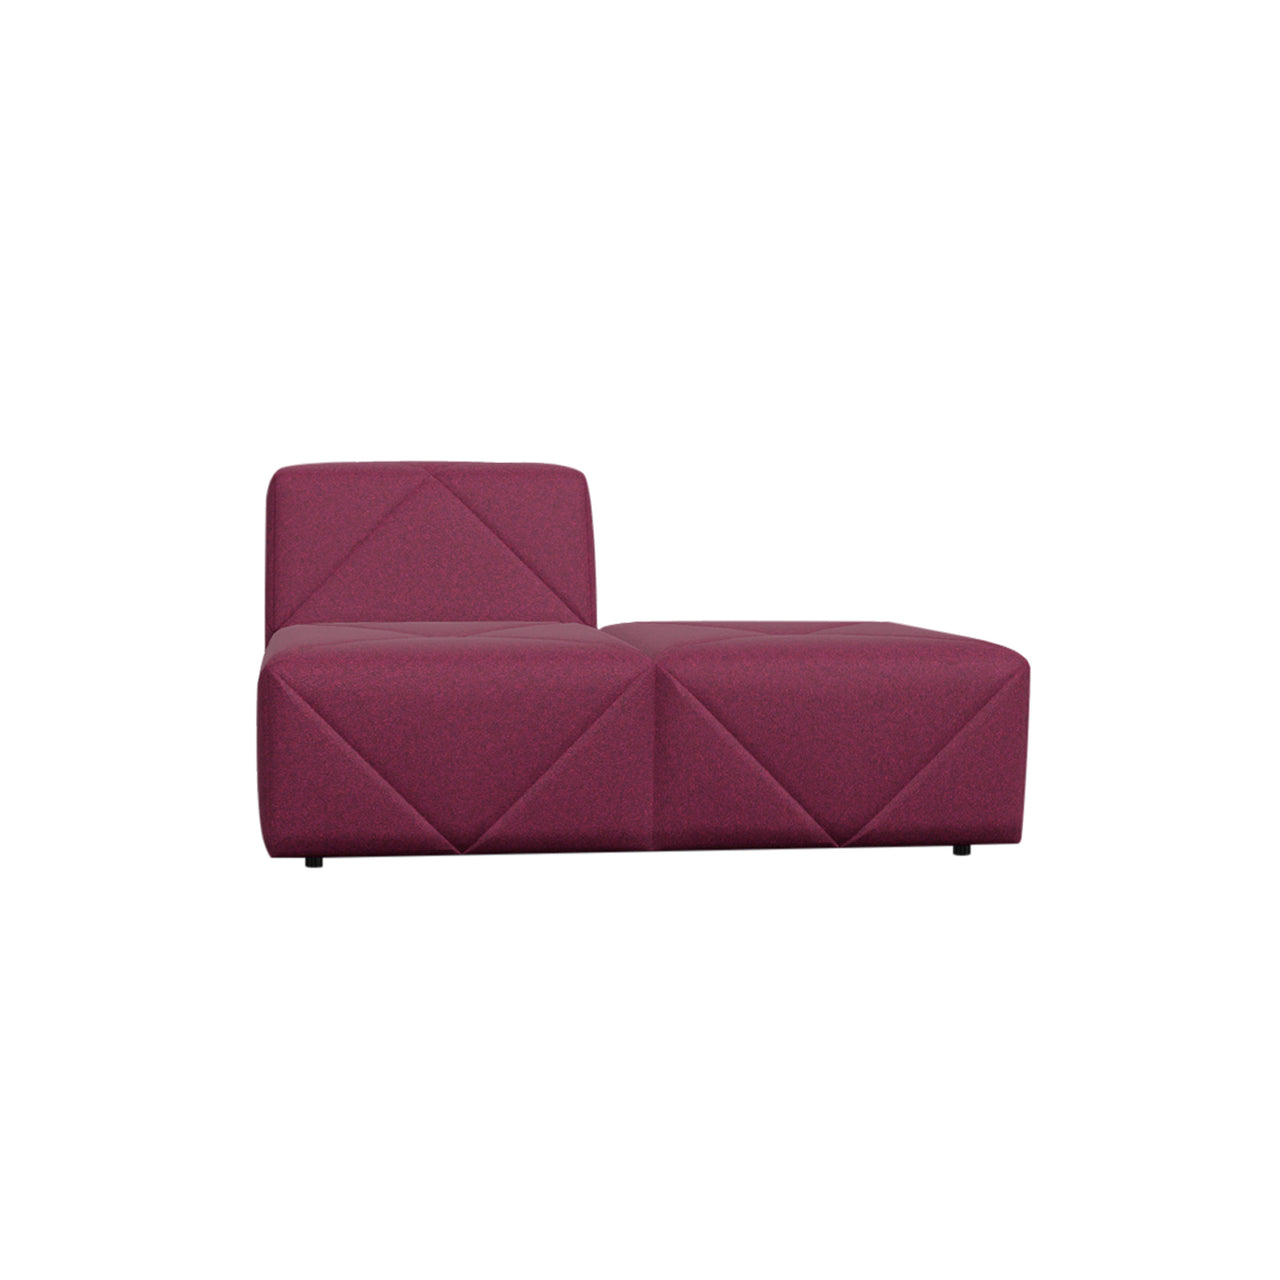 BFF Sofa Modules: Double Element Dormeuse - Right Back